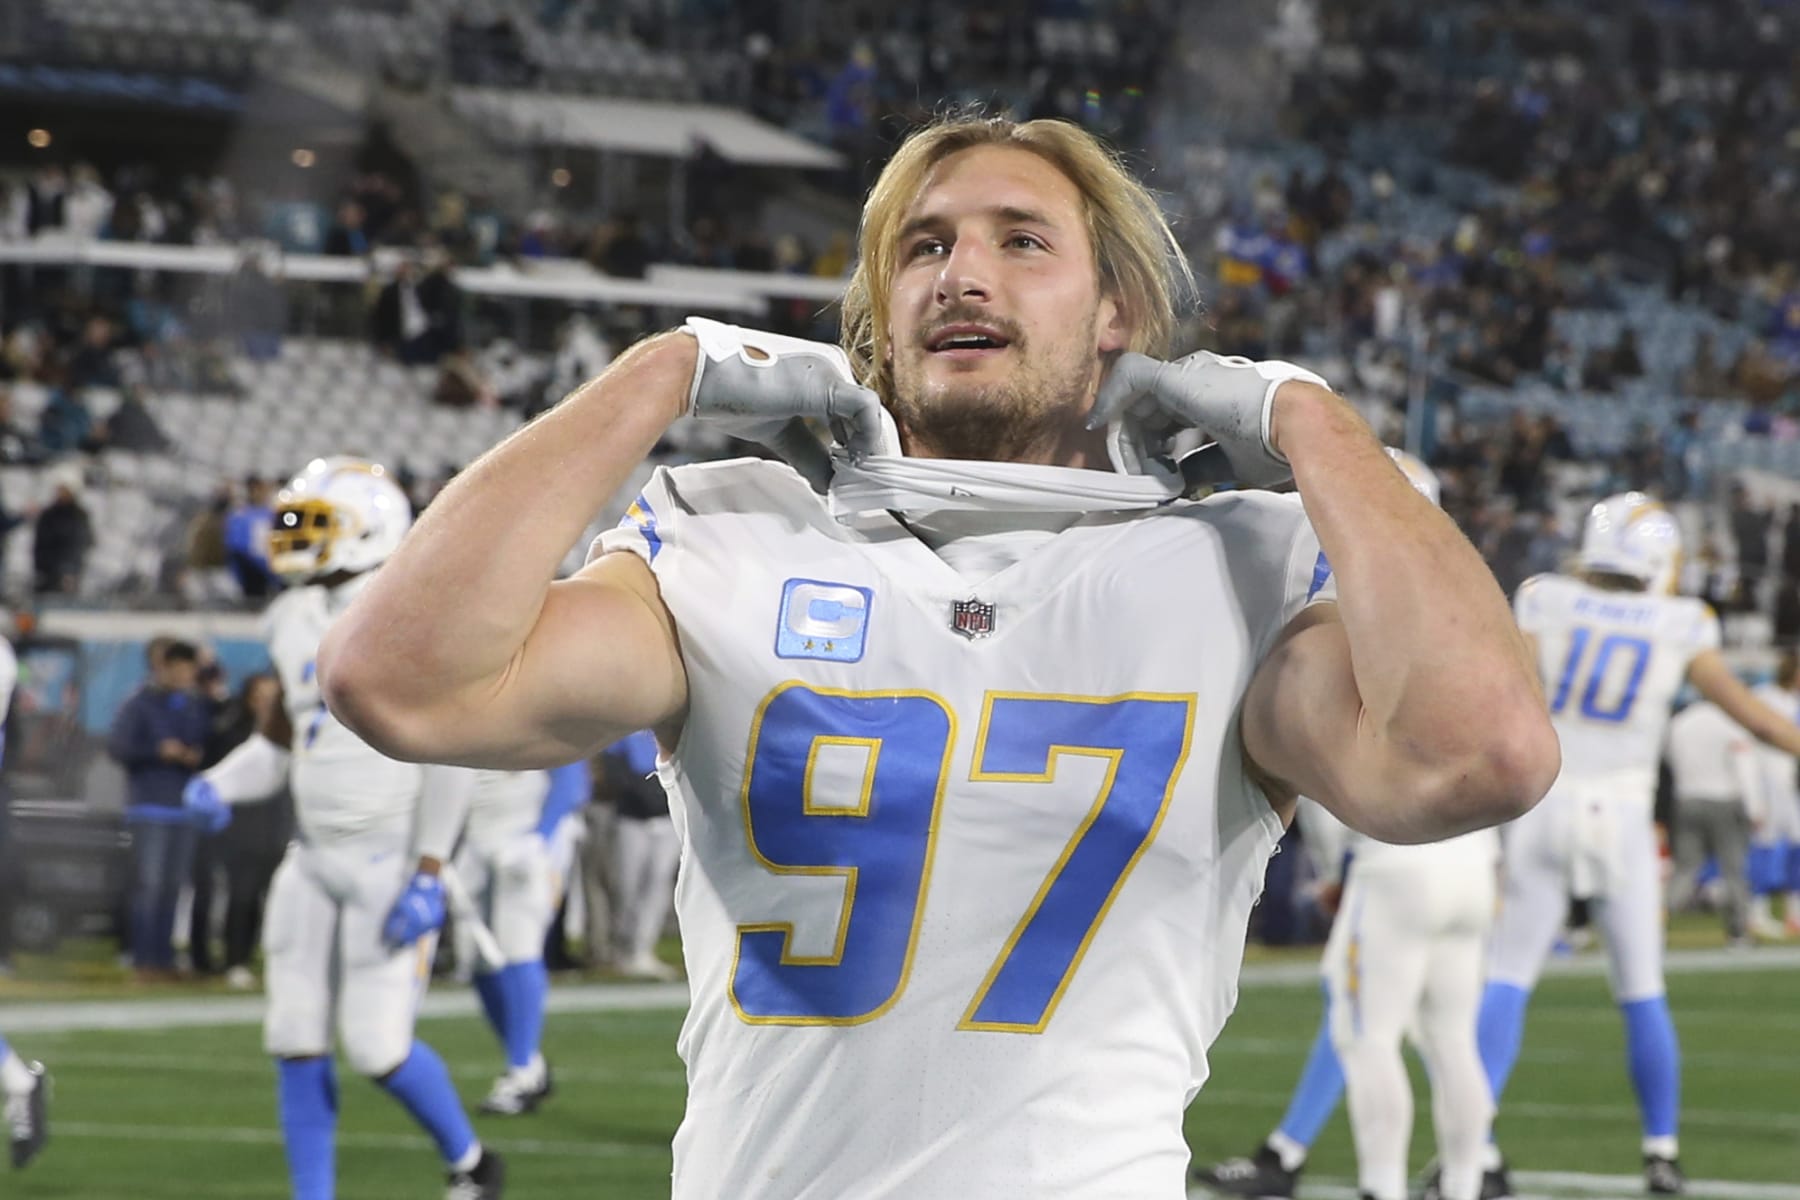 Rex Ryan rips Joey Bosa for not suiting up for Chargers this season